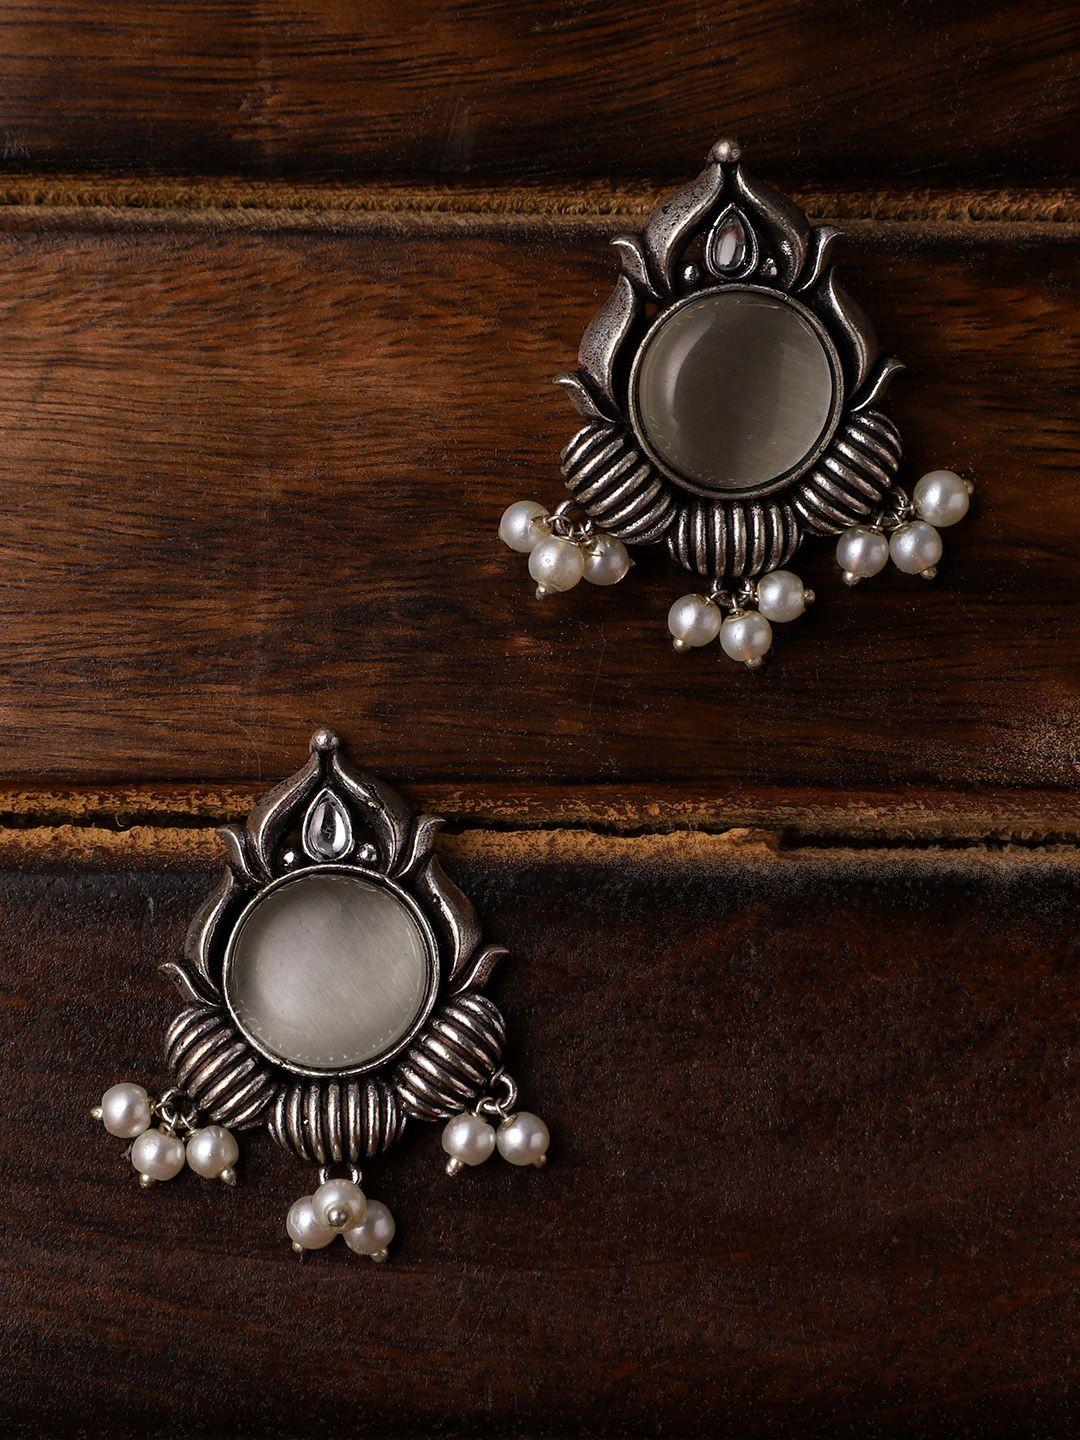 veni silver-plated beads-studded contemporary studs earrings